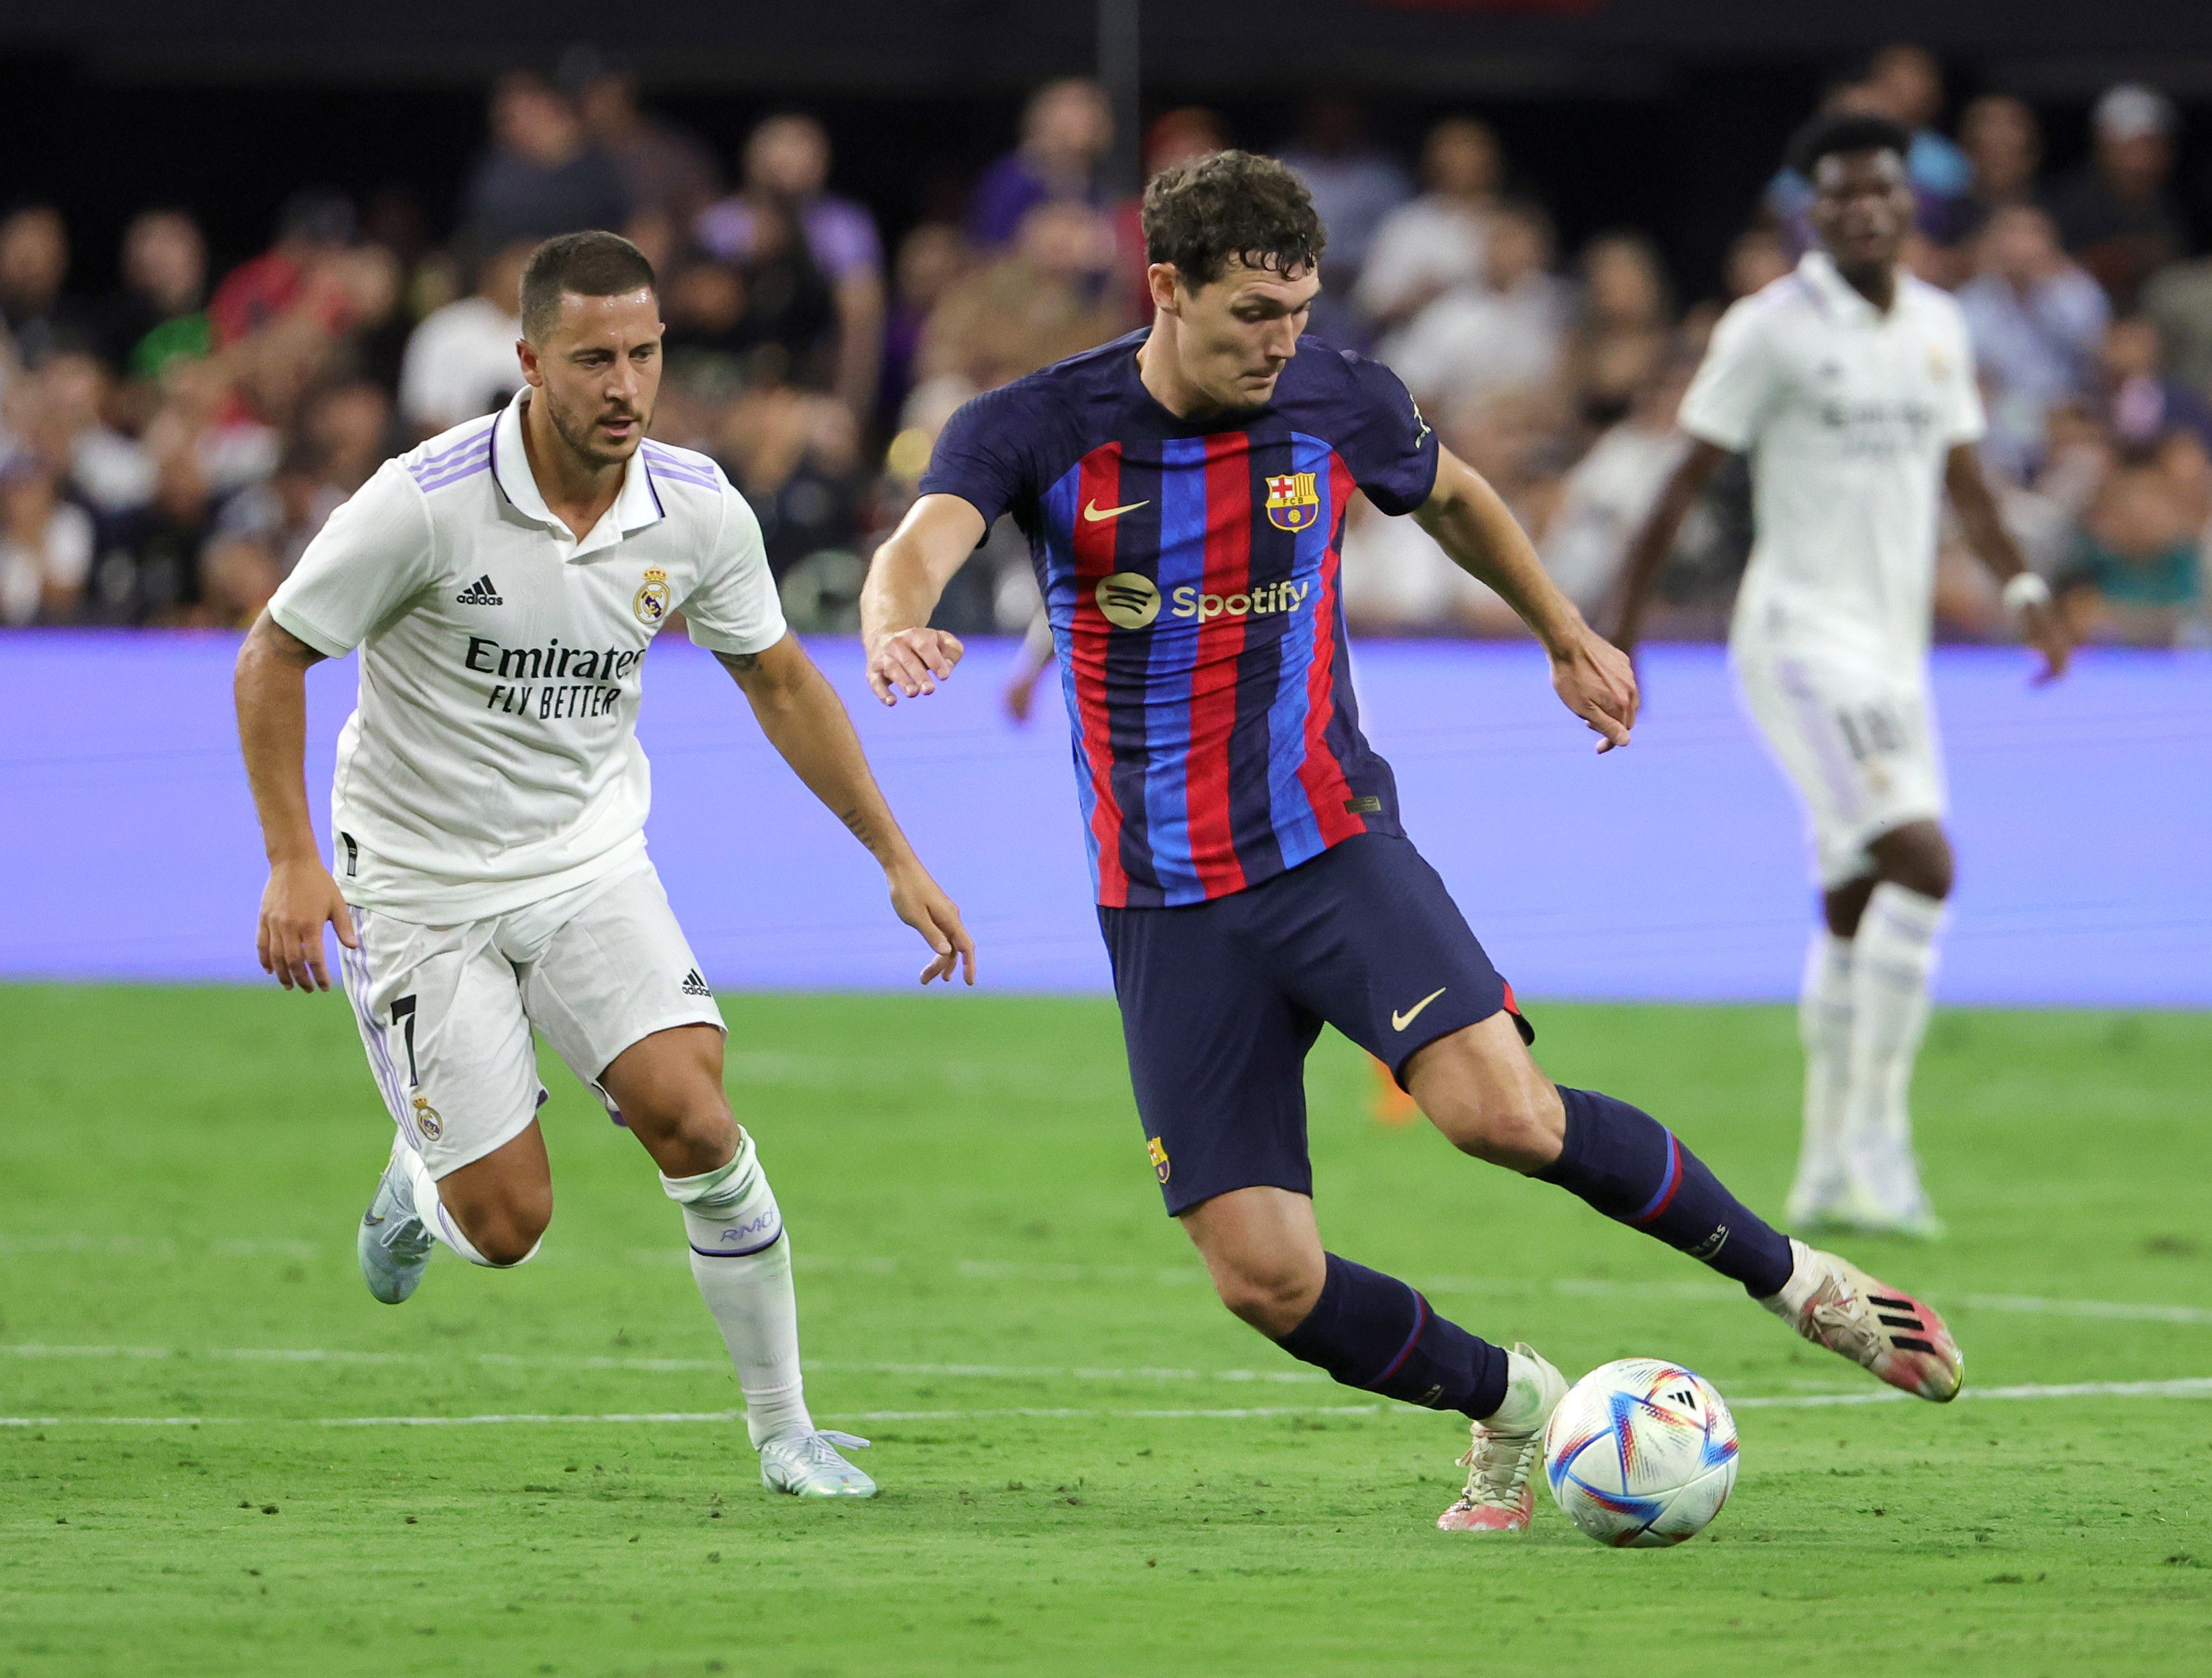 LAS VEGAS, NEVADA - JULY 23: Andreas Christensen #15 of Barcelona dribbles the ball under pressure from Eden Hazard #7 of Real Madrid during their preseason friendly match at Allegiant Stadium on July 23, 2022 in Las Vegas, Nevada. Barcelona defeated Real Madrid 1-0.   Ethan Miller/Getty Images/AFP
== FOR NEWSPAPERS, INTERNET, TELCOS & TELEVISION USE ONLY ==